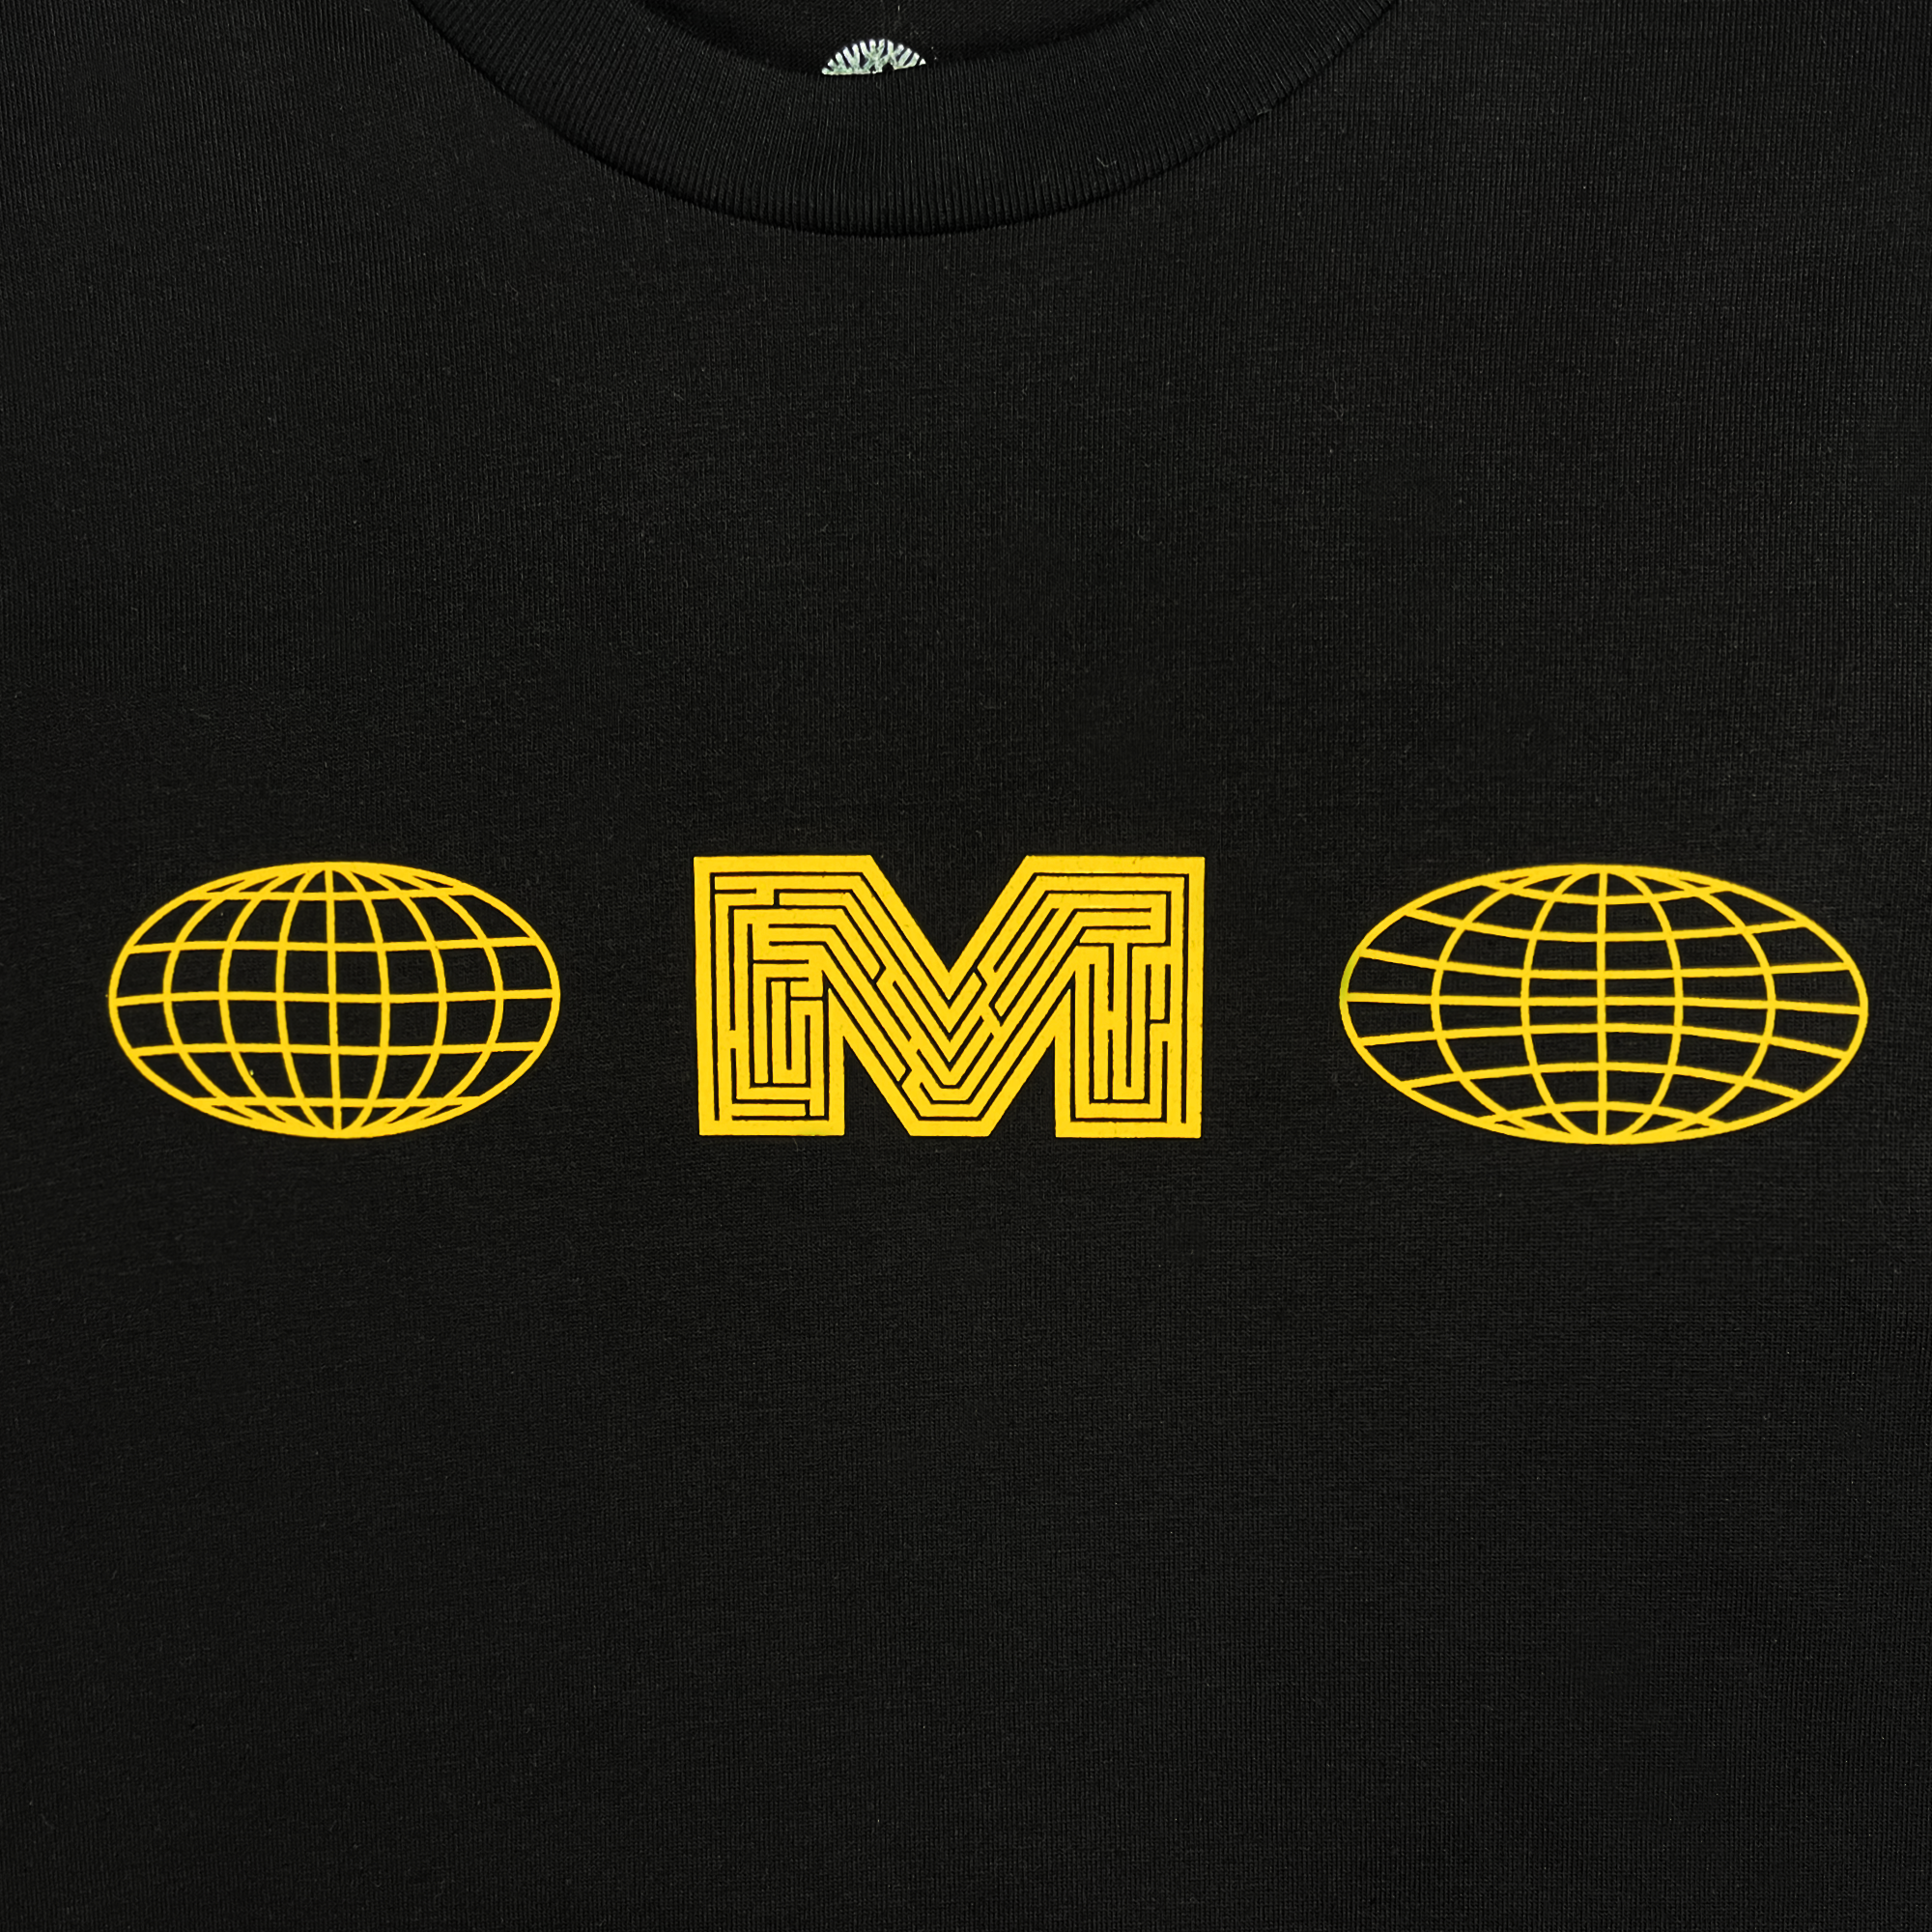 Front detail of black long sleeve t-shirt with Macarthur Maze  logo.